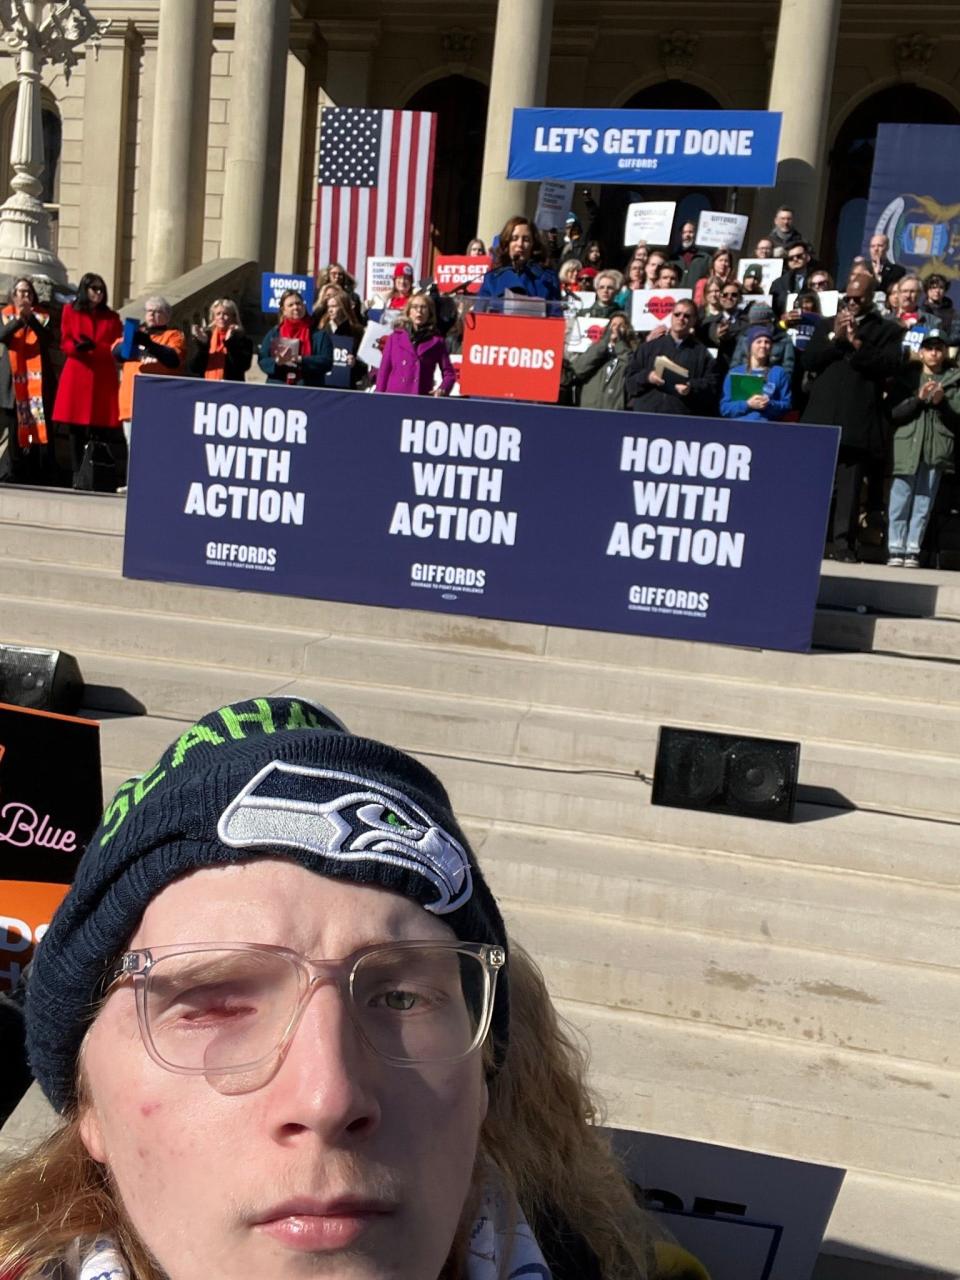 Guy Boyd at the Michigan Capitol on March 15, 2023 for Gov. Gretchen Whitmer and former Congresswoman Gabby Giffords' rally for gun violence prevention legislaiton.